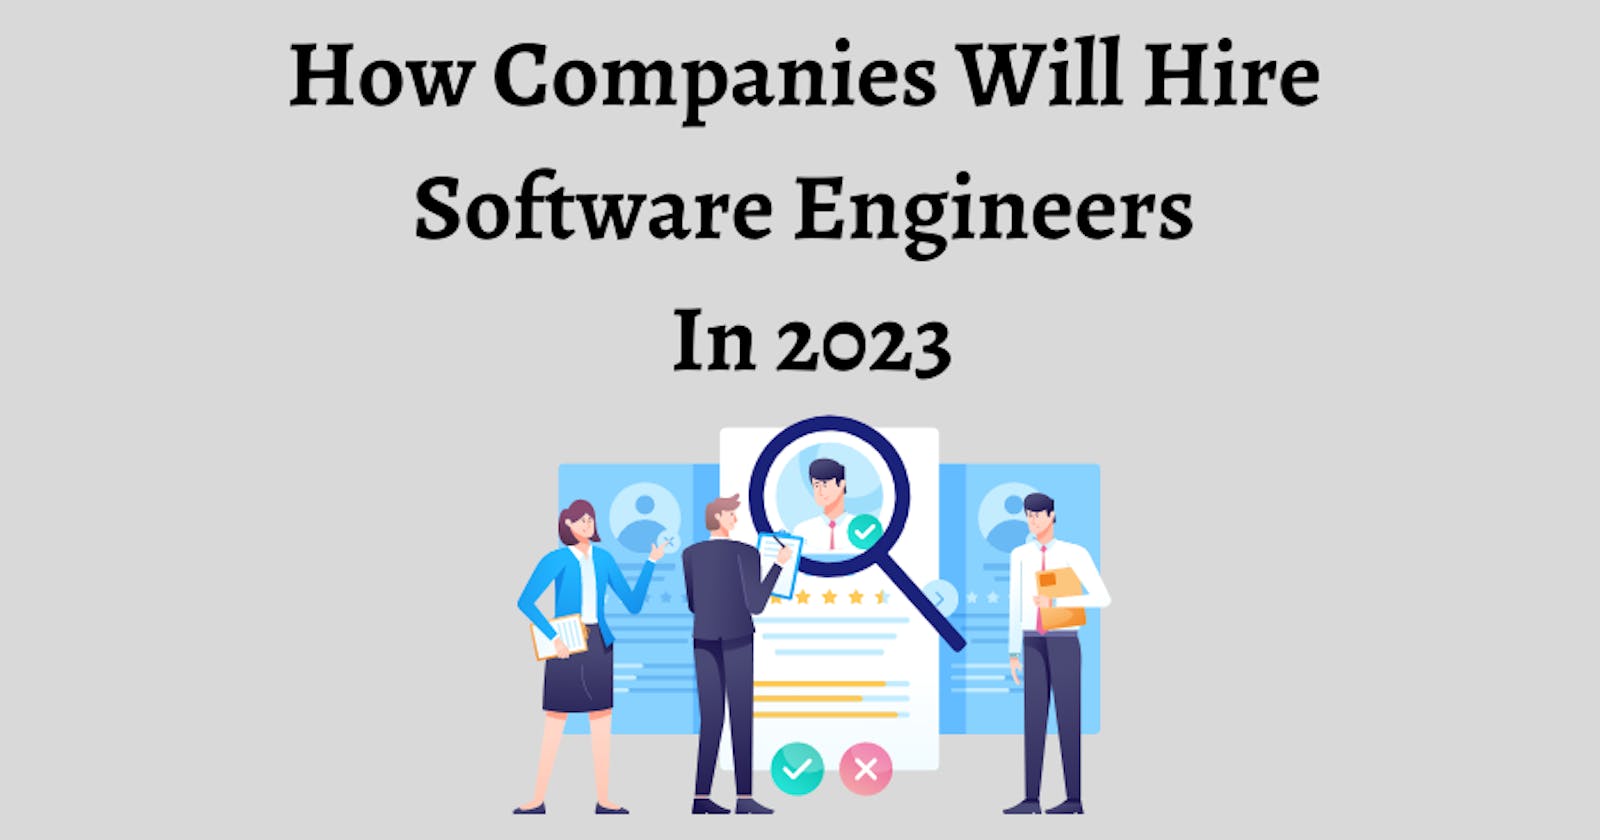 How Companies Will Hire Software Engineers In 2023